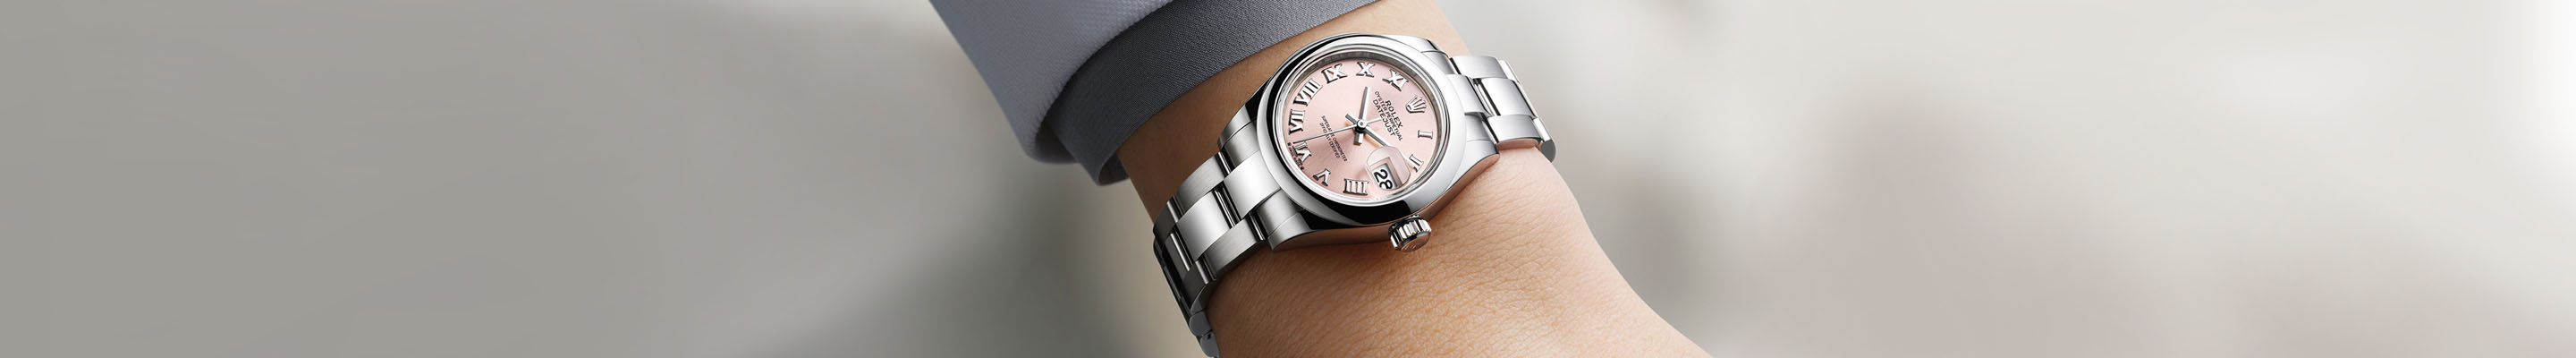 Rolex Women's Watches at Chow Tai Fook